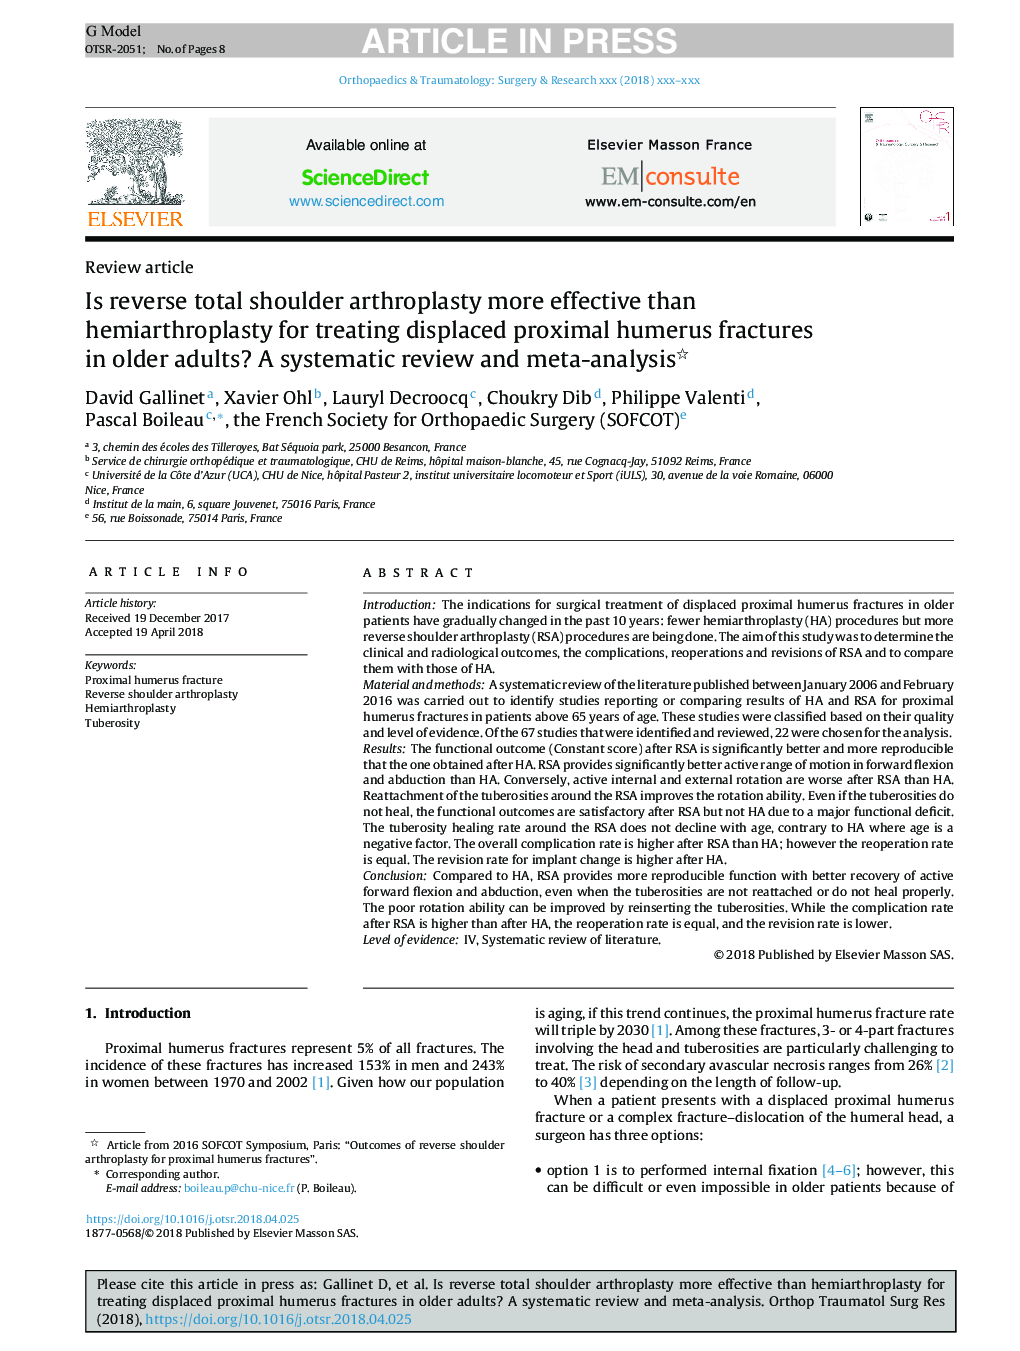 Is reverse total shoulder arthroplasty more effective than hemiarthroplasty for treating displaced proximal humerus fractures in older adults? A systematic review and meta-analysis